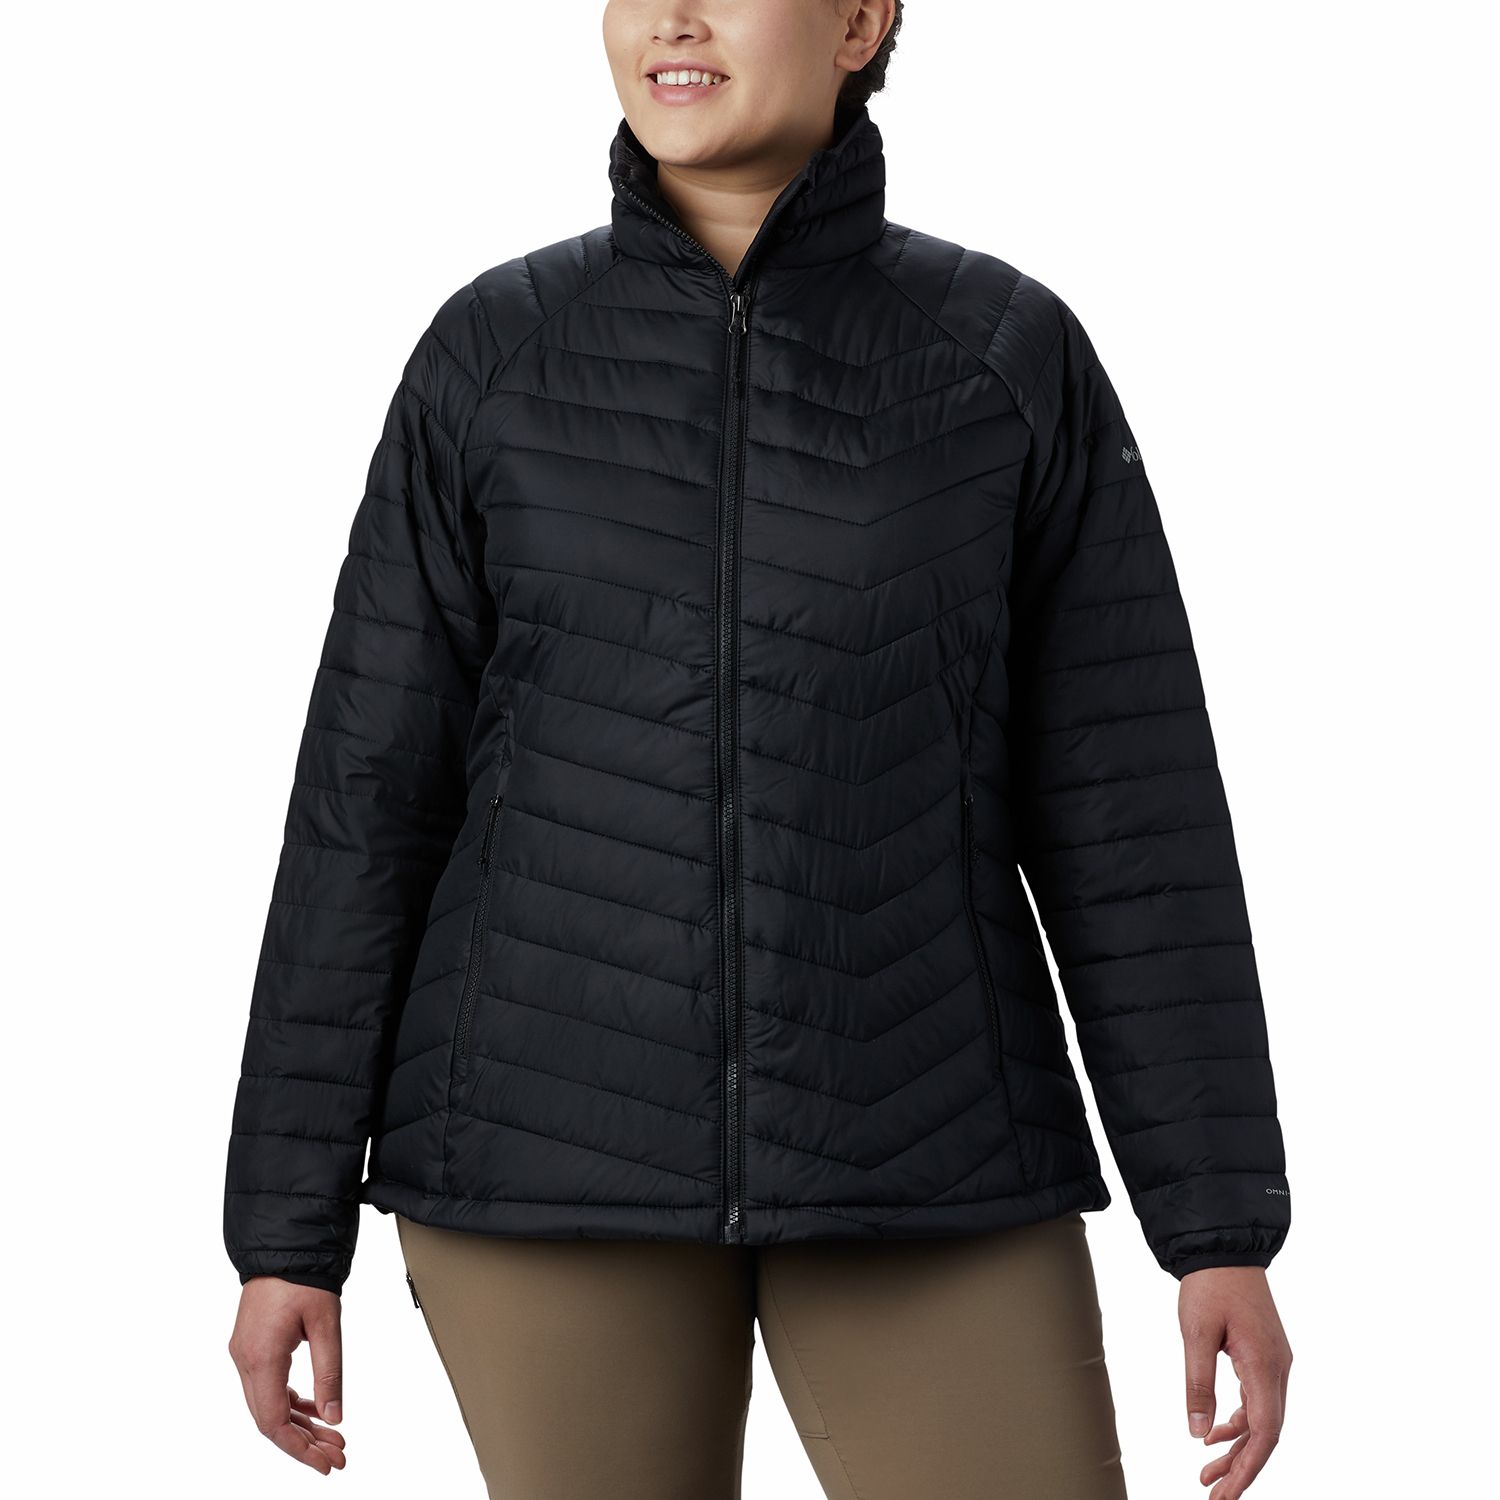 columbia jackets on sale womens plus size